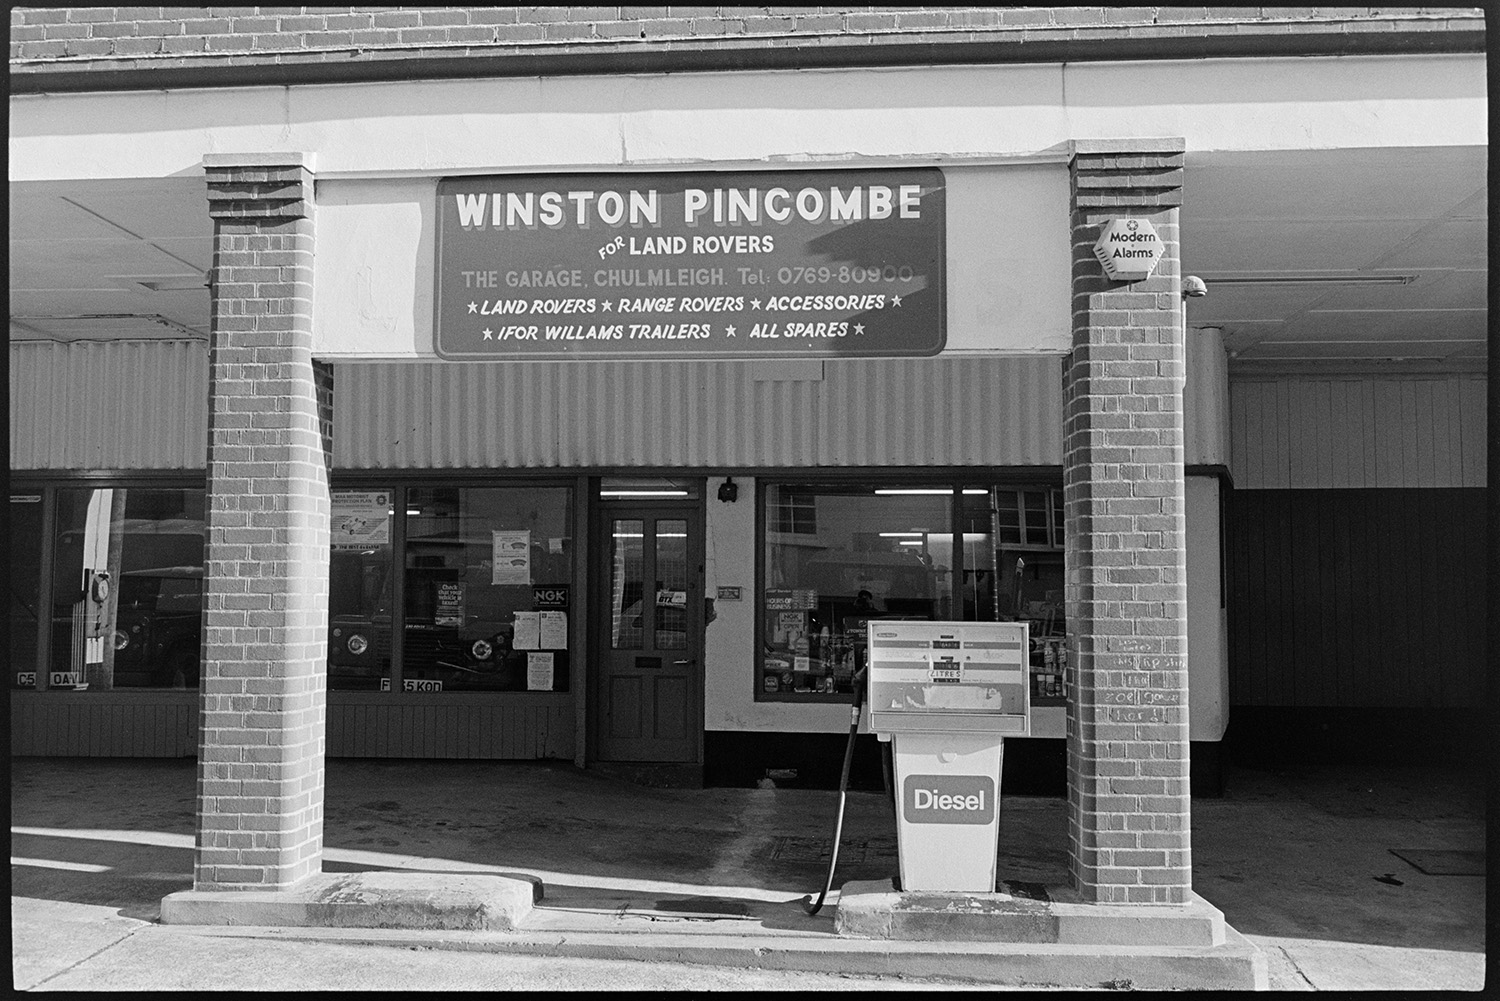 Garage workshop, mechanics at work, proprietor in office, front of premises, store room. 
[The front of the Winston Pincombe Garage in South Molton Street, Chulmleigh. The garage sign and diesel pump are visible outside.]